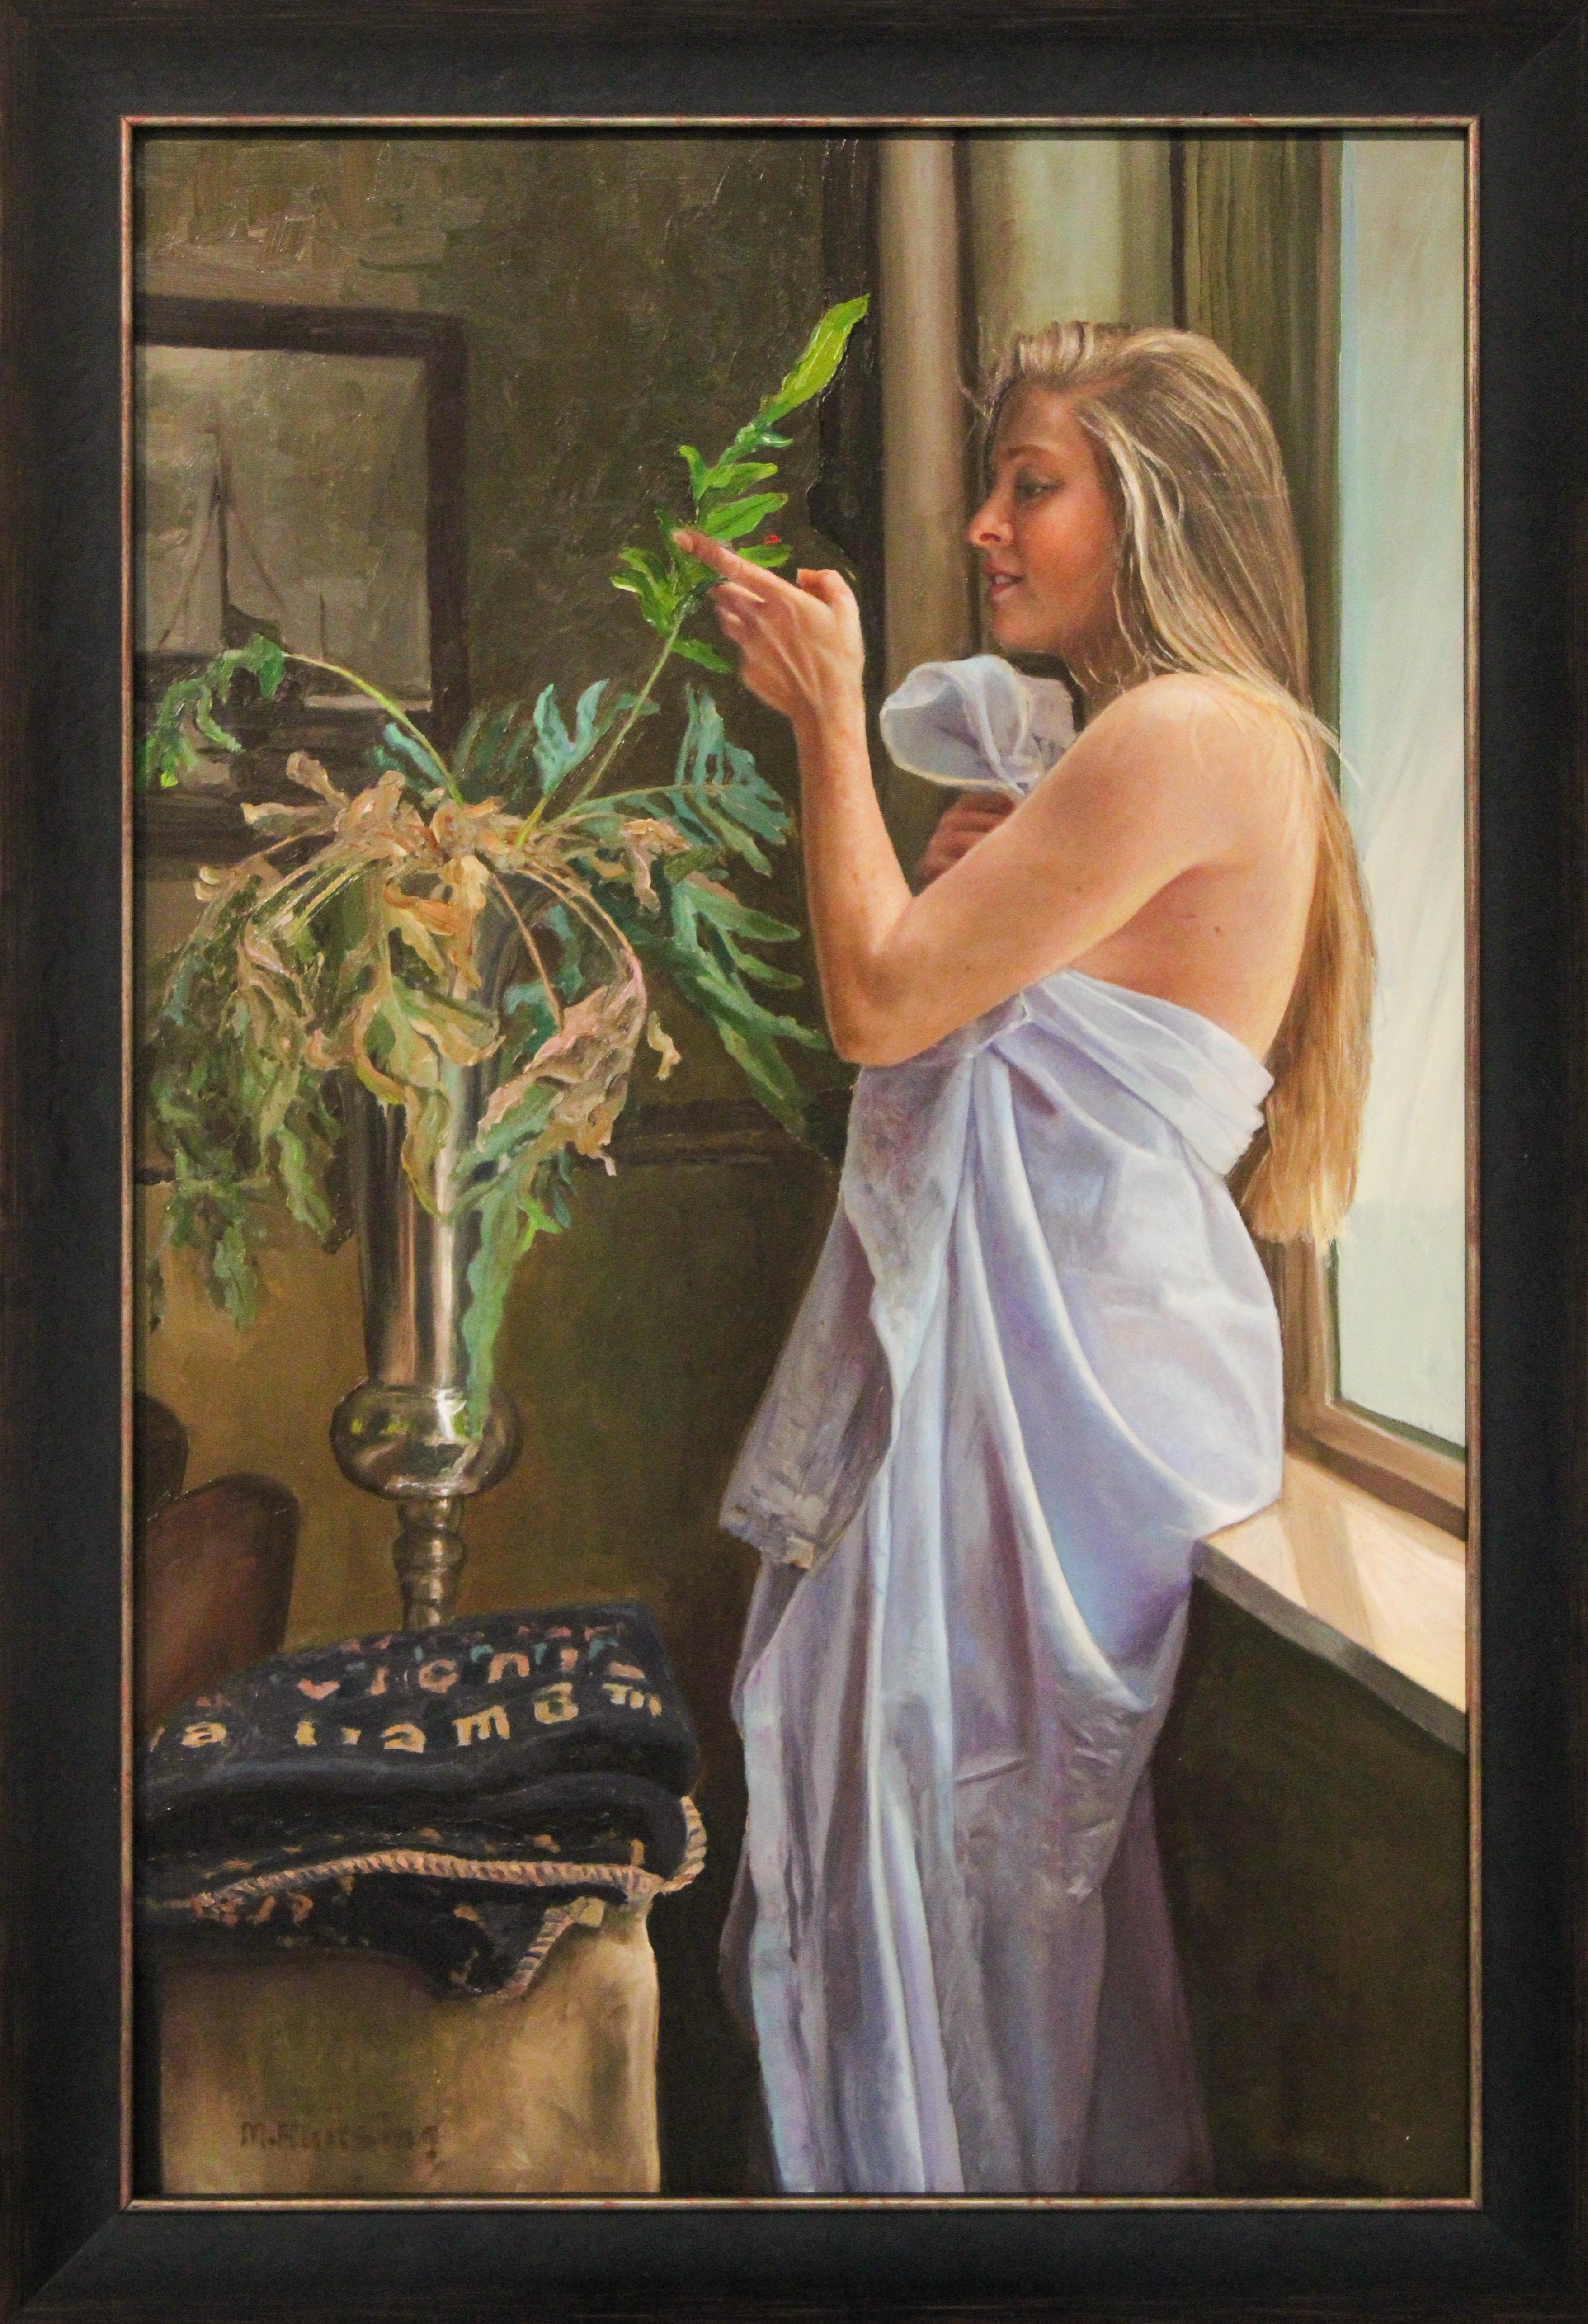 Marten Huitsing
The girl in the old house
70 x 45 cm ( frame is include, with frame the size is 80 x 55 cm)
Oil on wood panel

The paintings of this artist have been part of the collection of Galerie Bonnard since his graduation (2010) at the